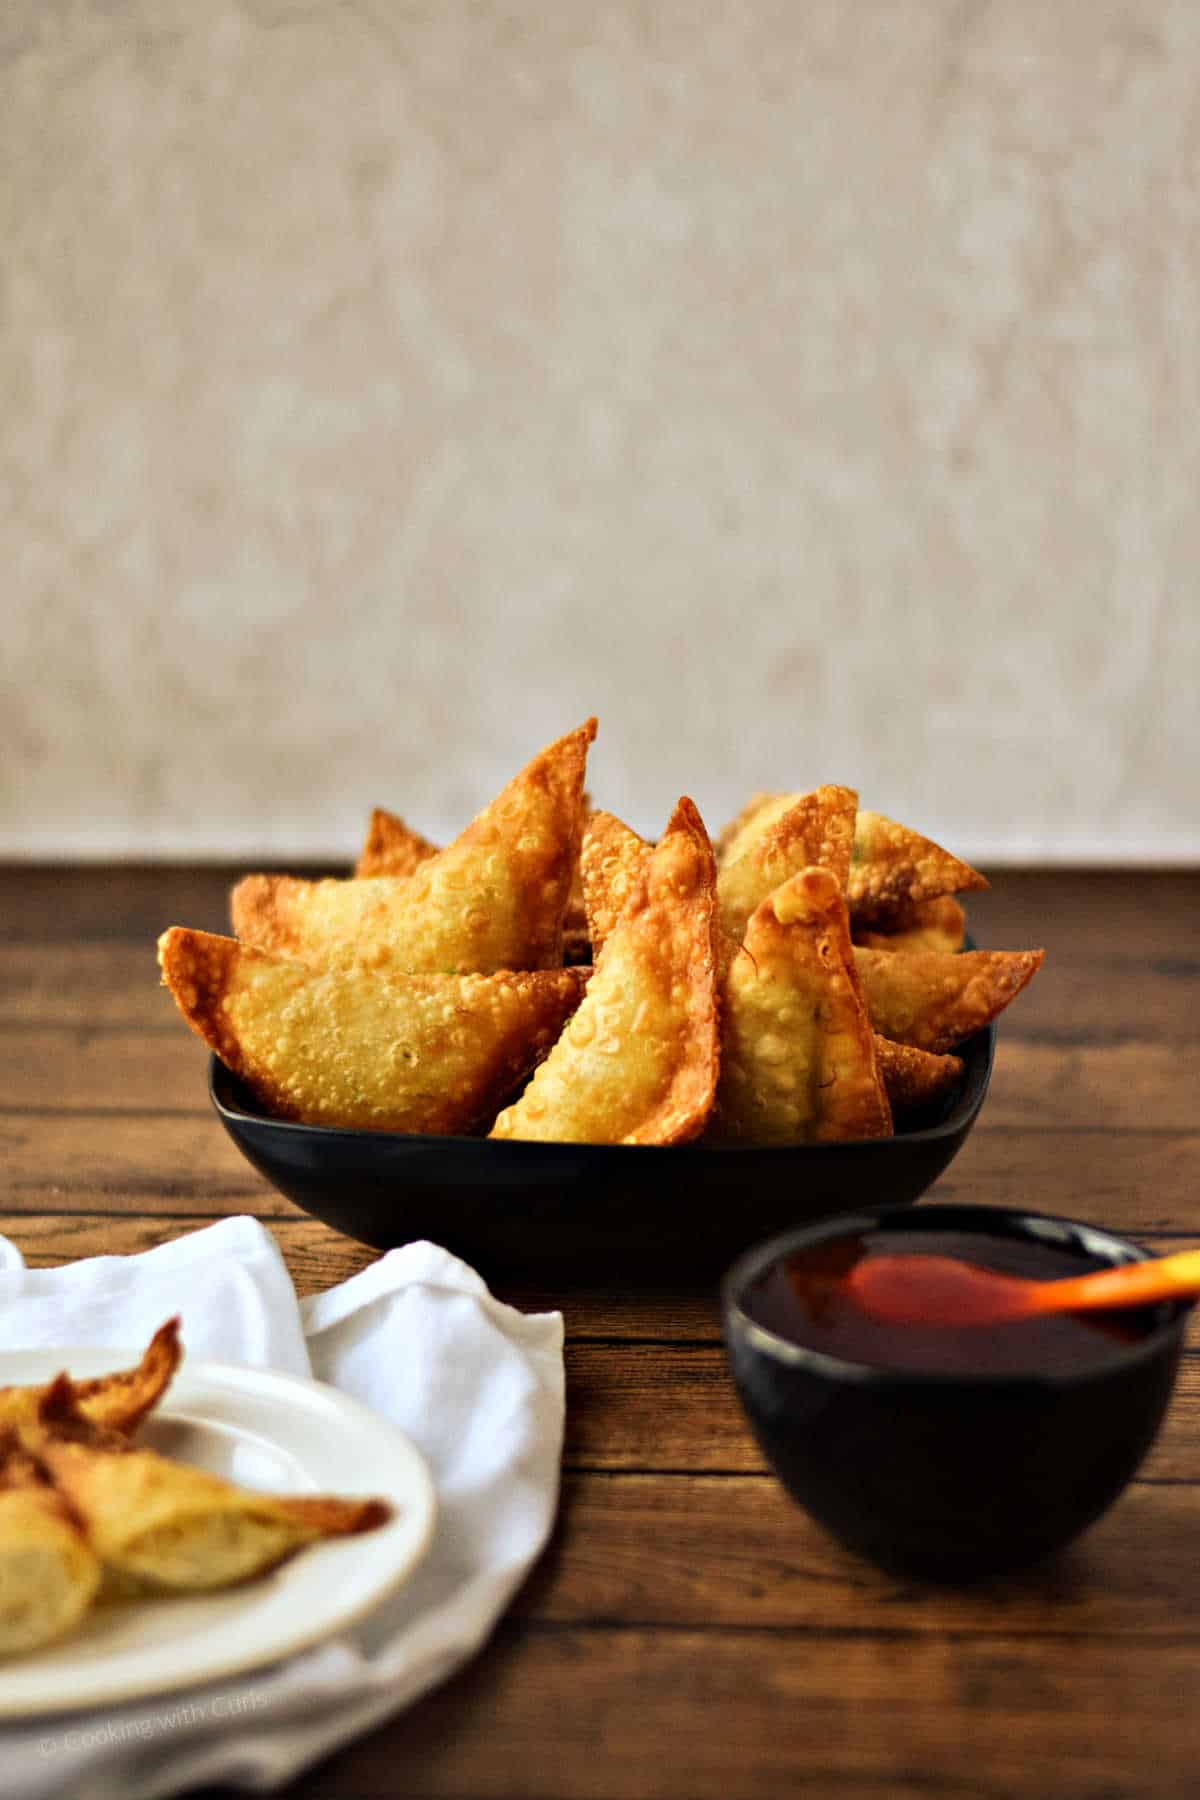 Crab rangoons in a serving bowl with a small bowl of sweet and sour sauce on the side.